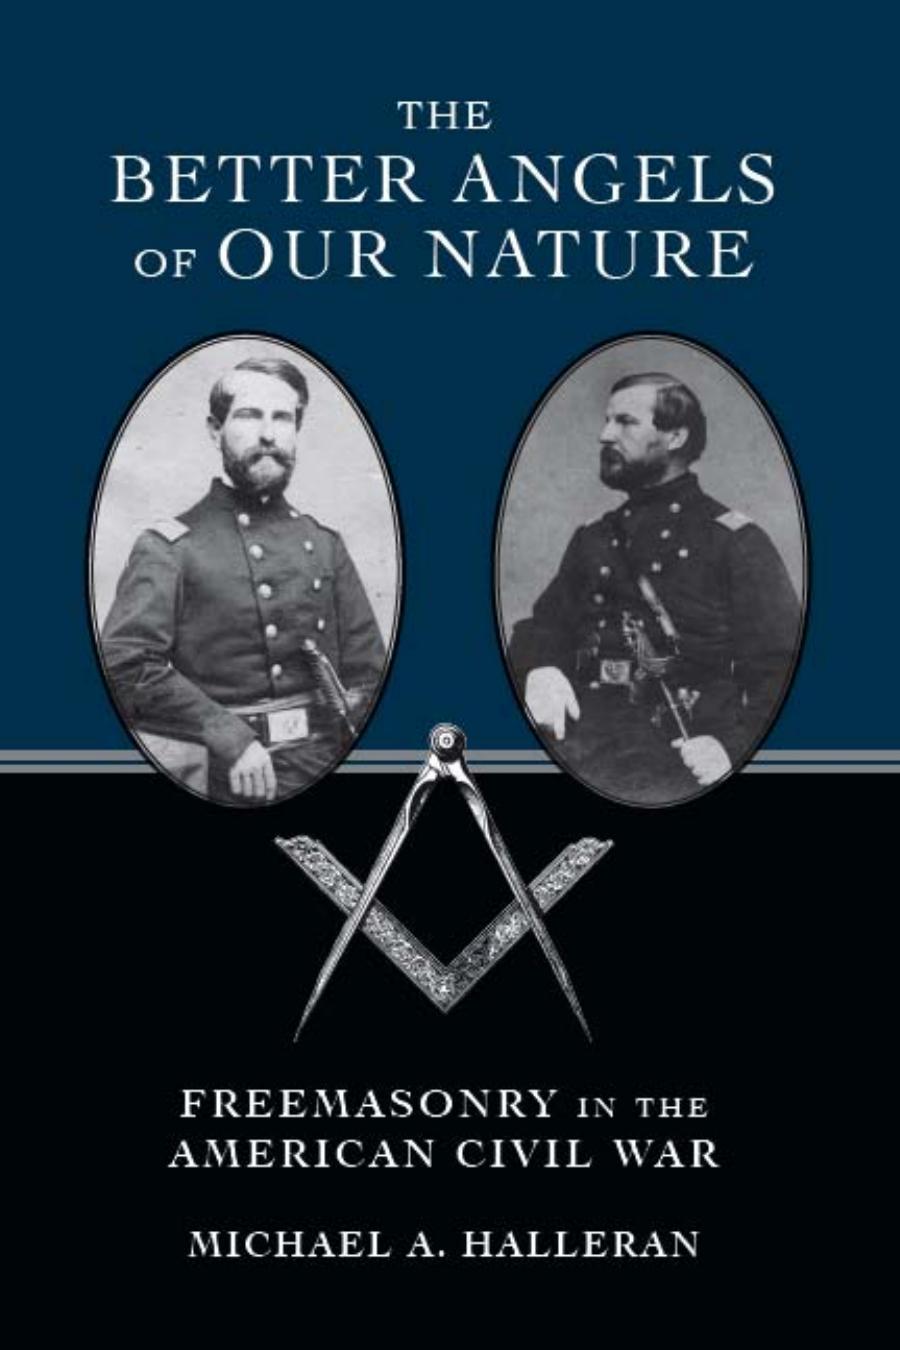 The Better Angels of Our Nature: Freemasonry in the American Civil War